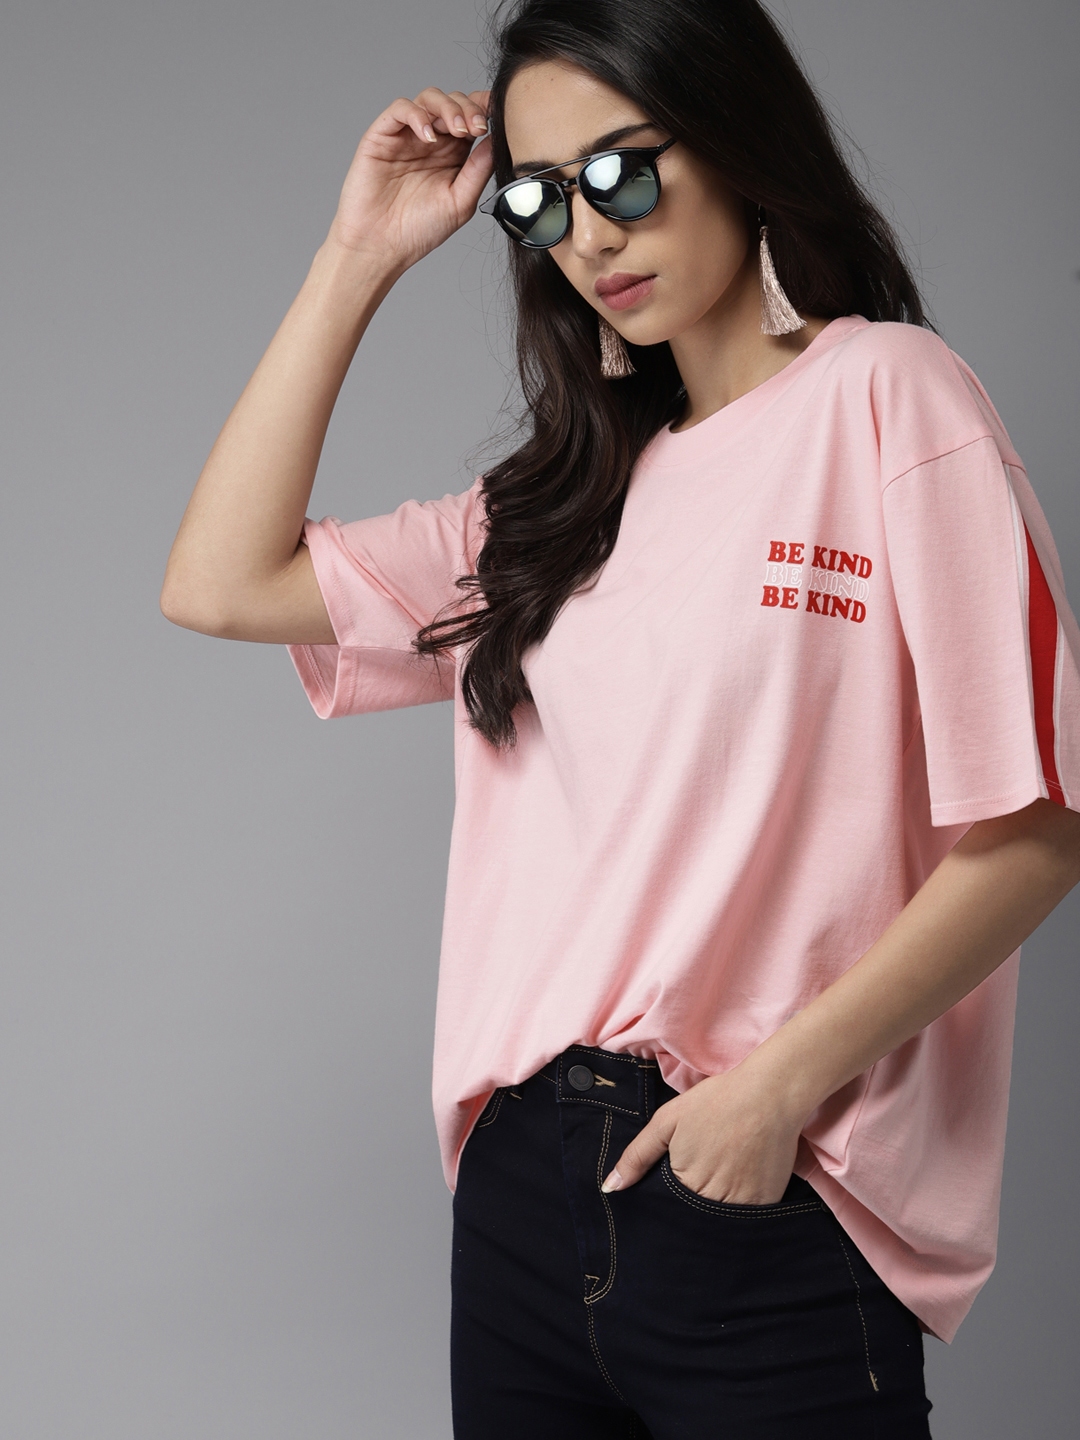 loose t shirts for women